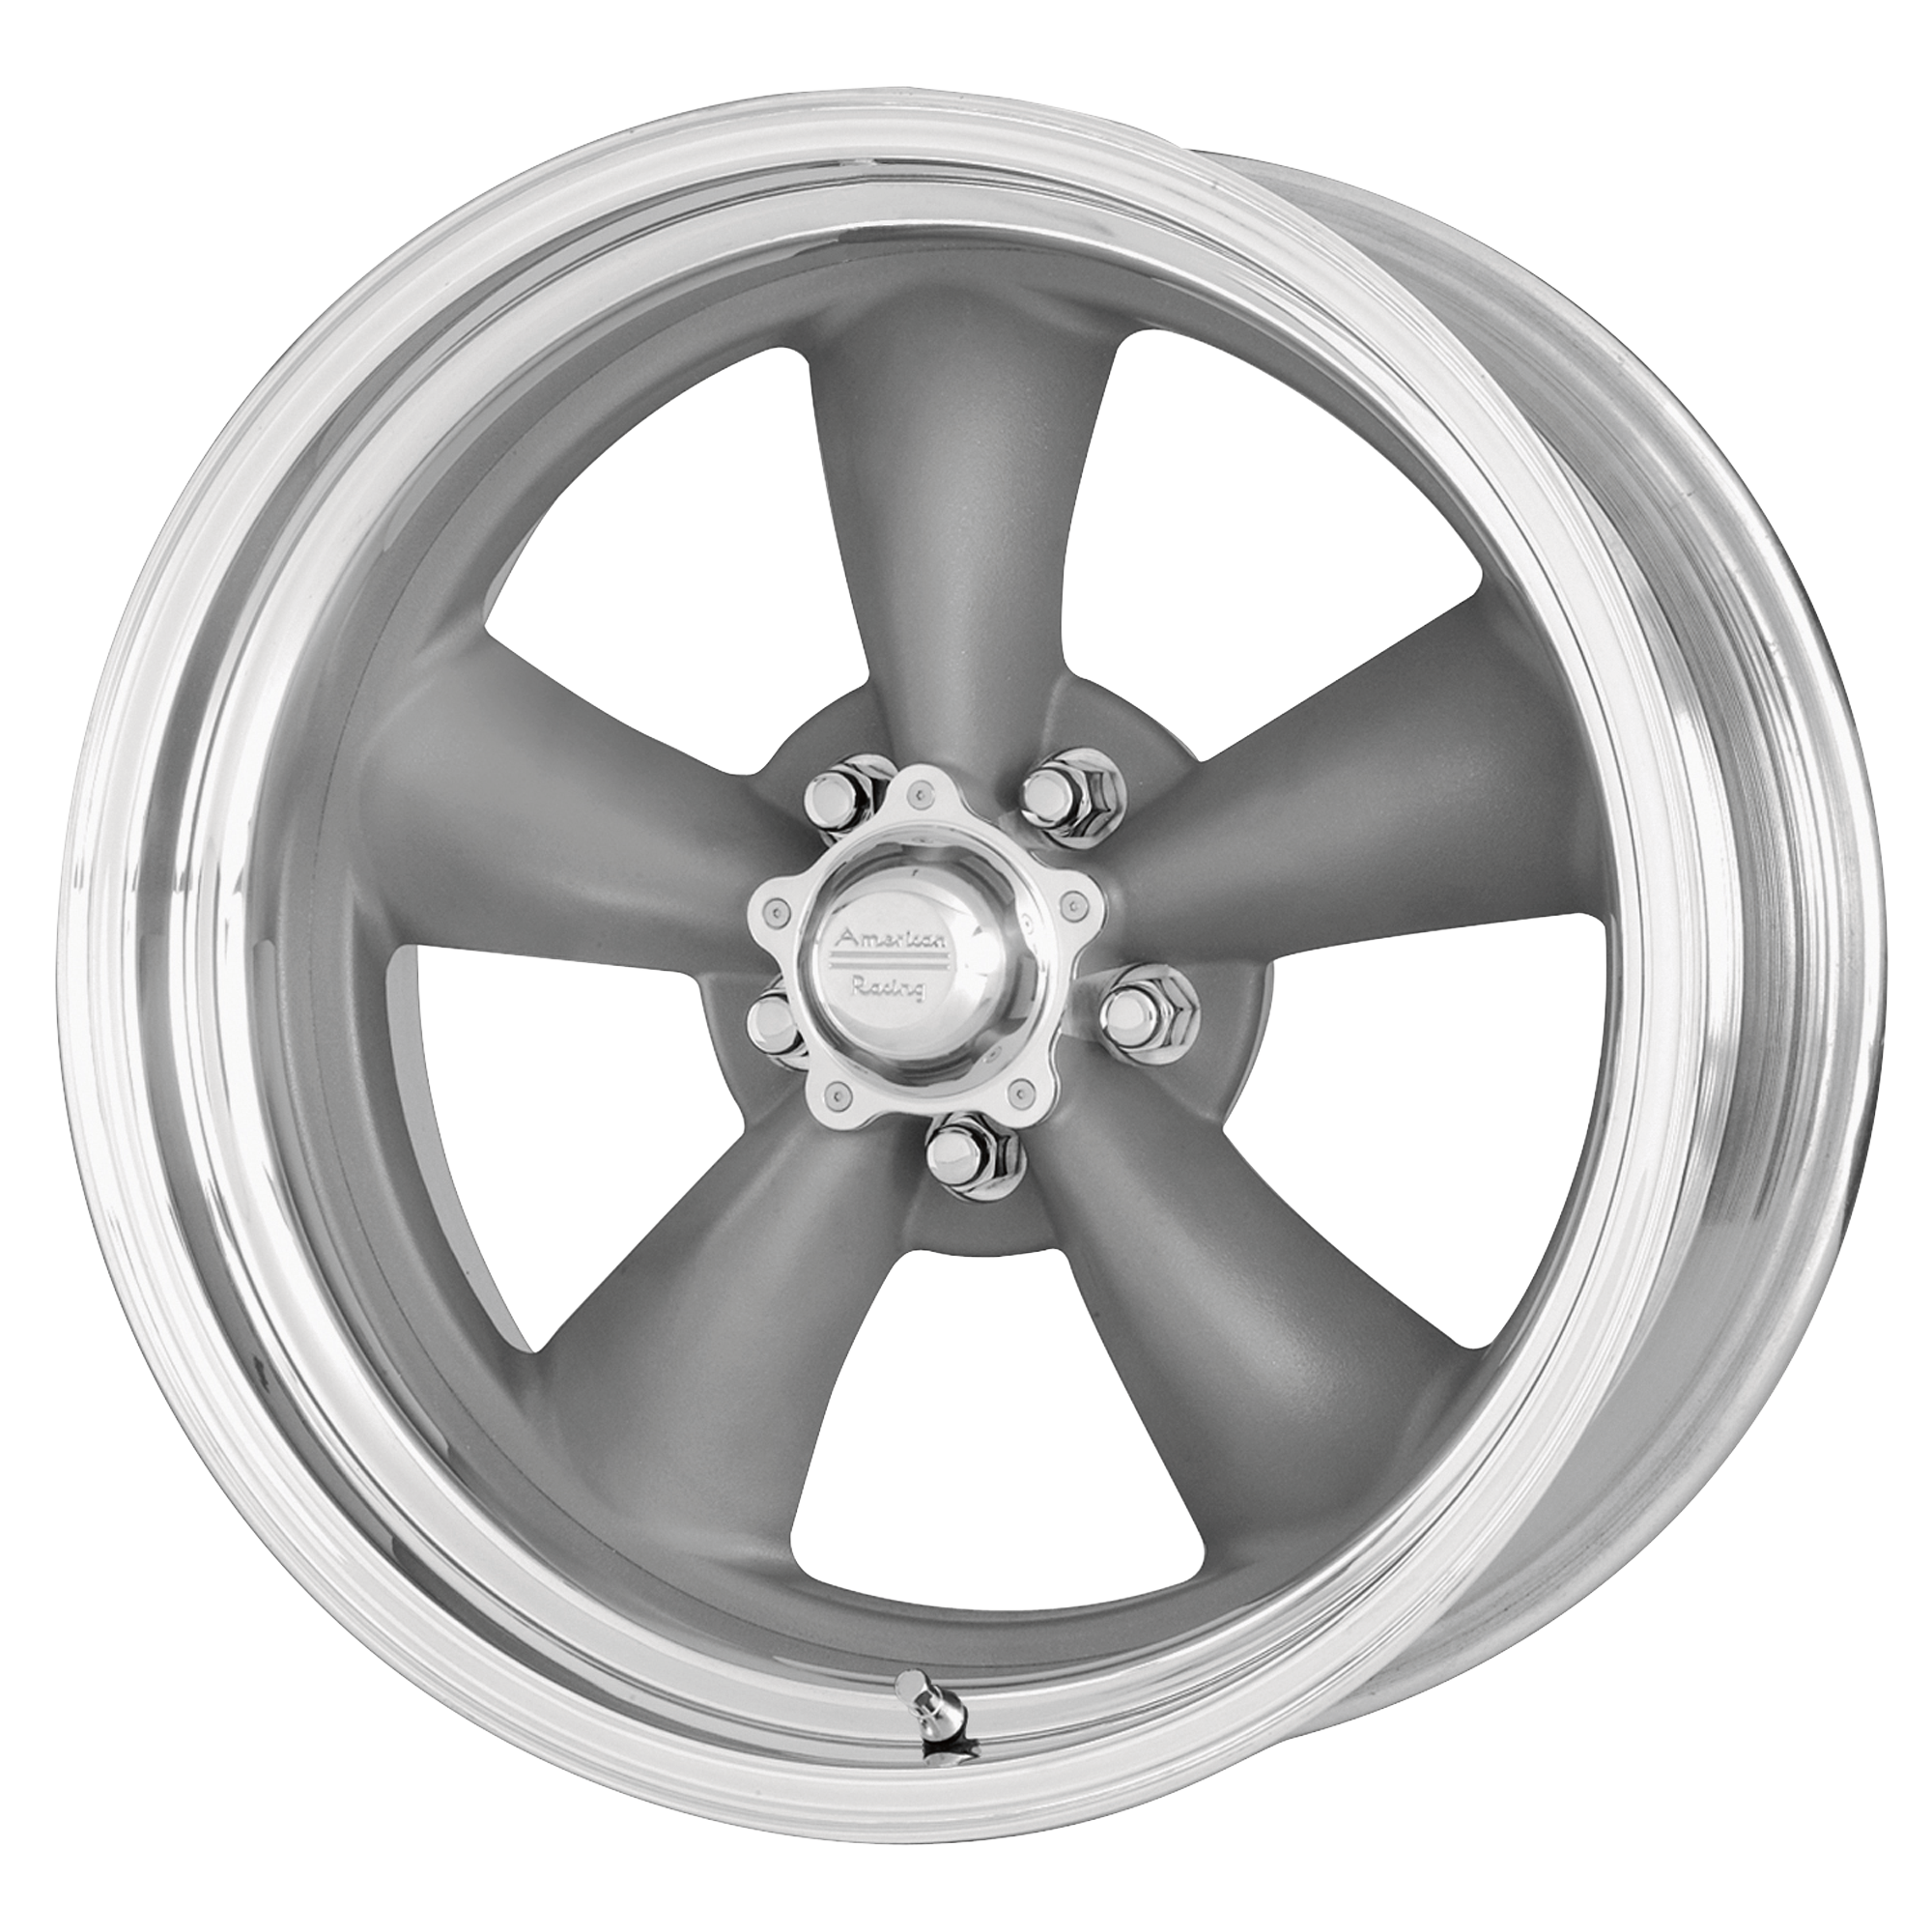 CLASSIC TORQ THRUST II ONE PIECE 16x7 5x120.65 MAG GRAY W/ MACHINED LIP (0 mm) - Tires and Engine Performance